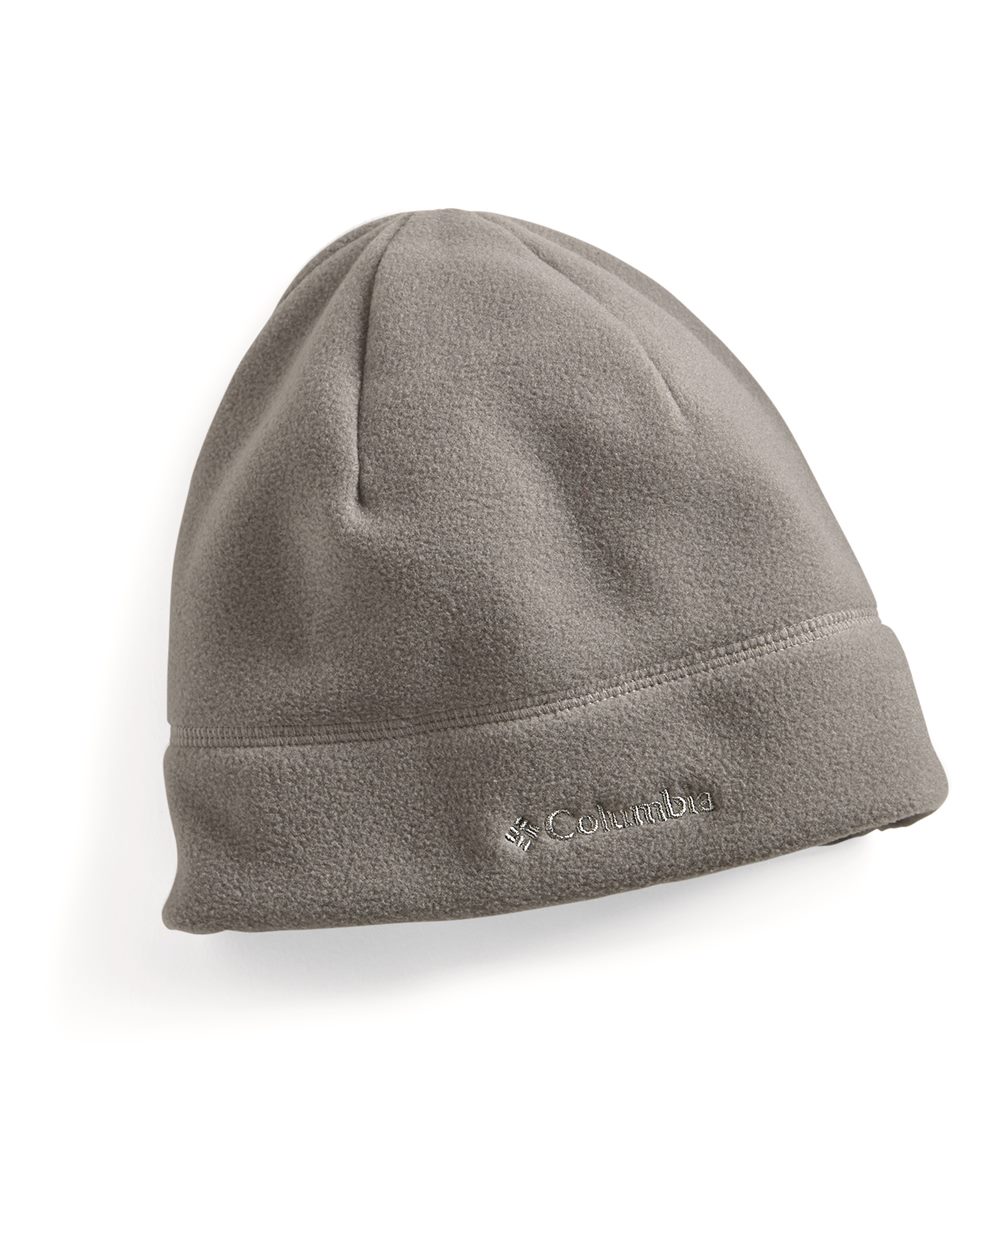 click to view Boulder/ Columbia Grey